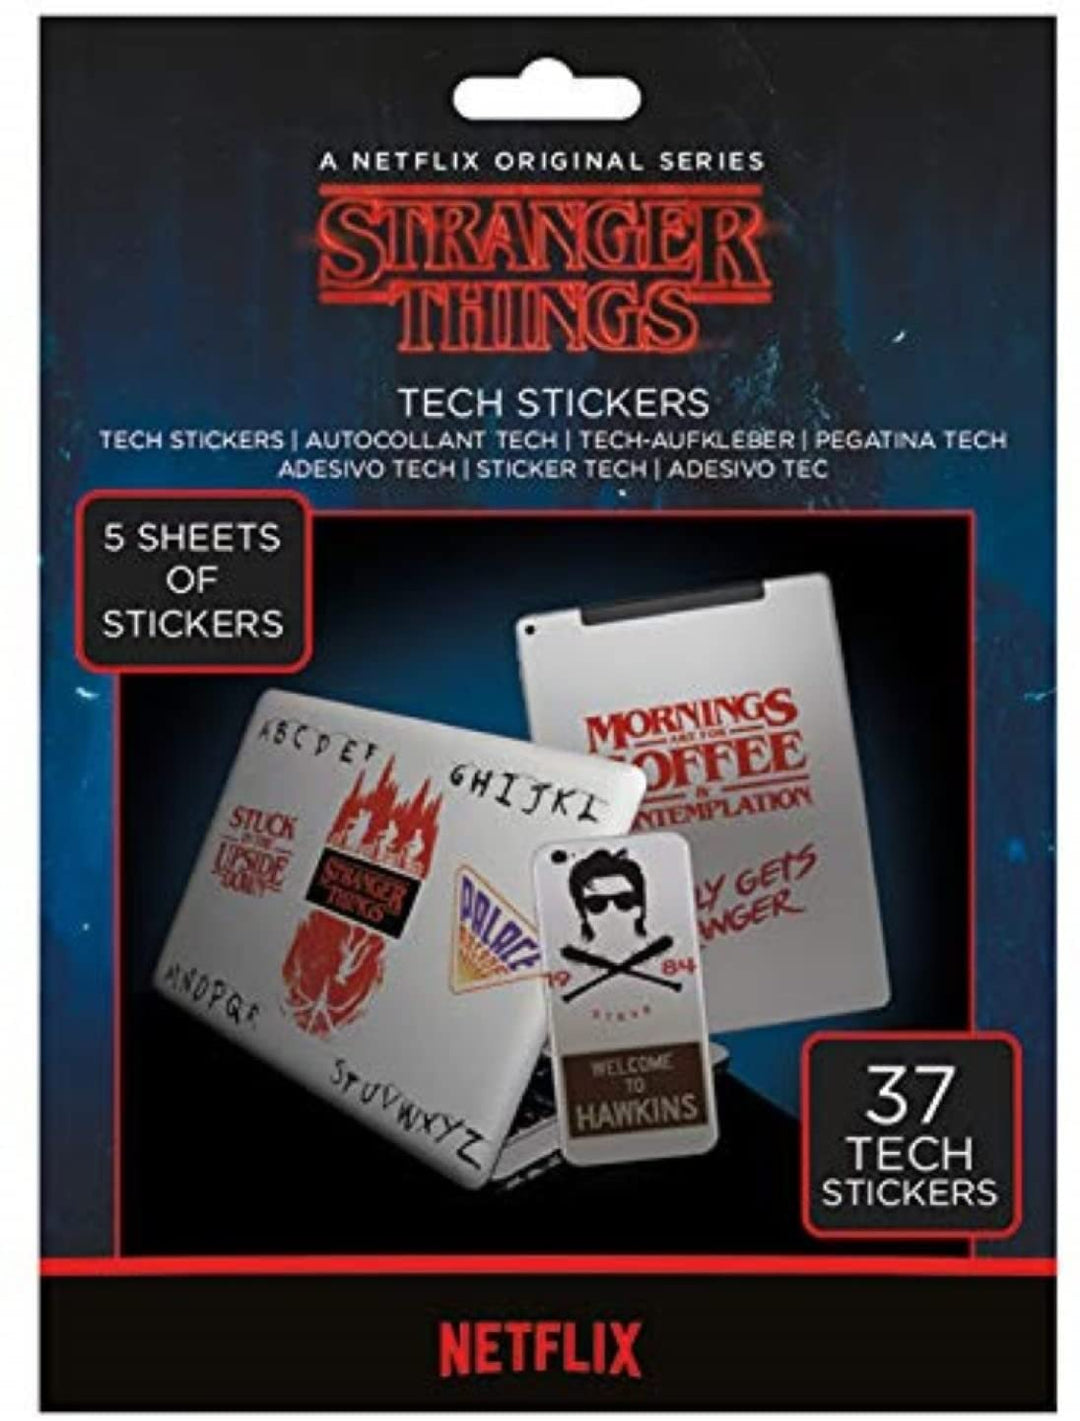 Pyramid International Stranger Things Pack of 37 Tech Stickers - Official Merchandise, Multi-Colour, 18 x 24cm, TS7403